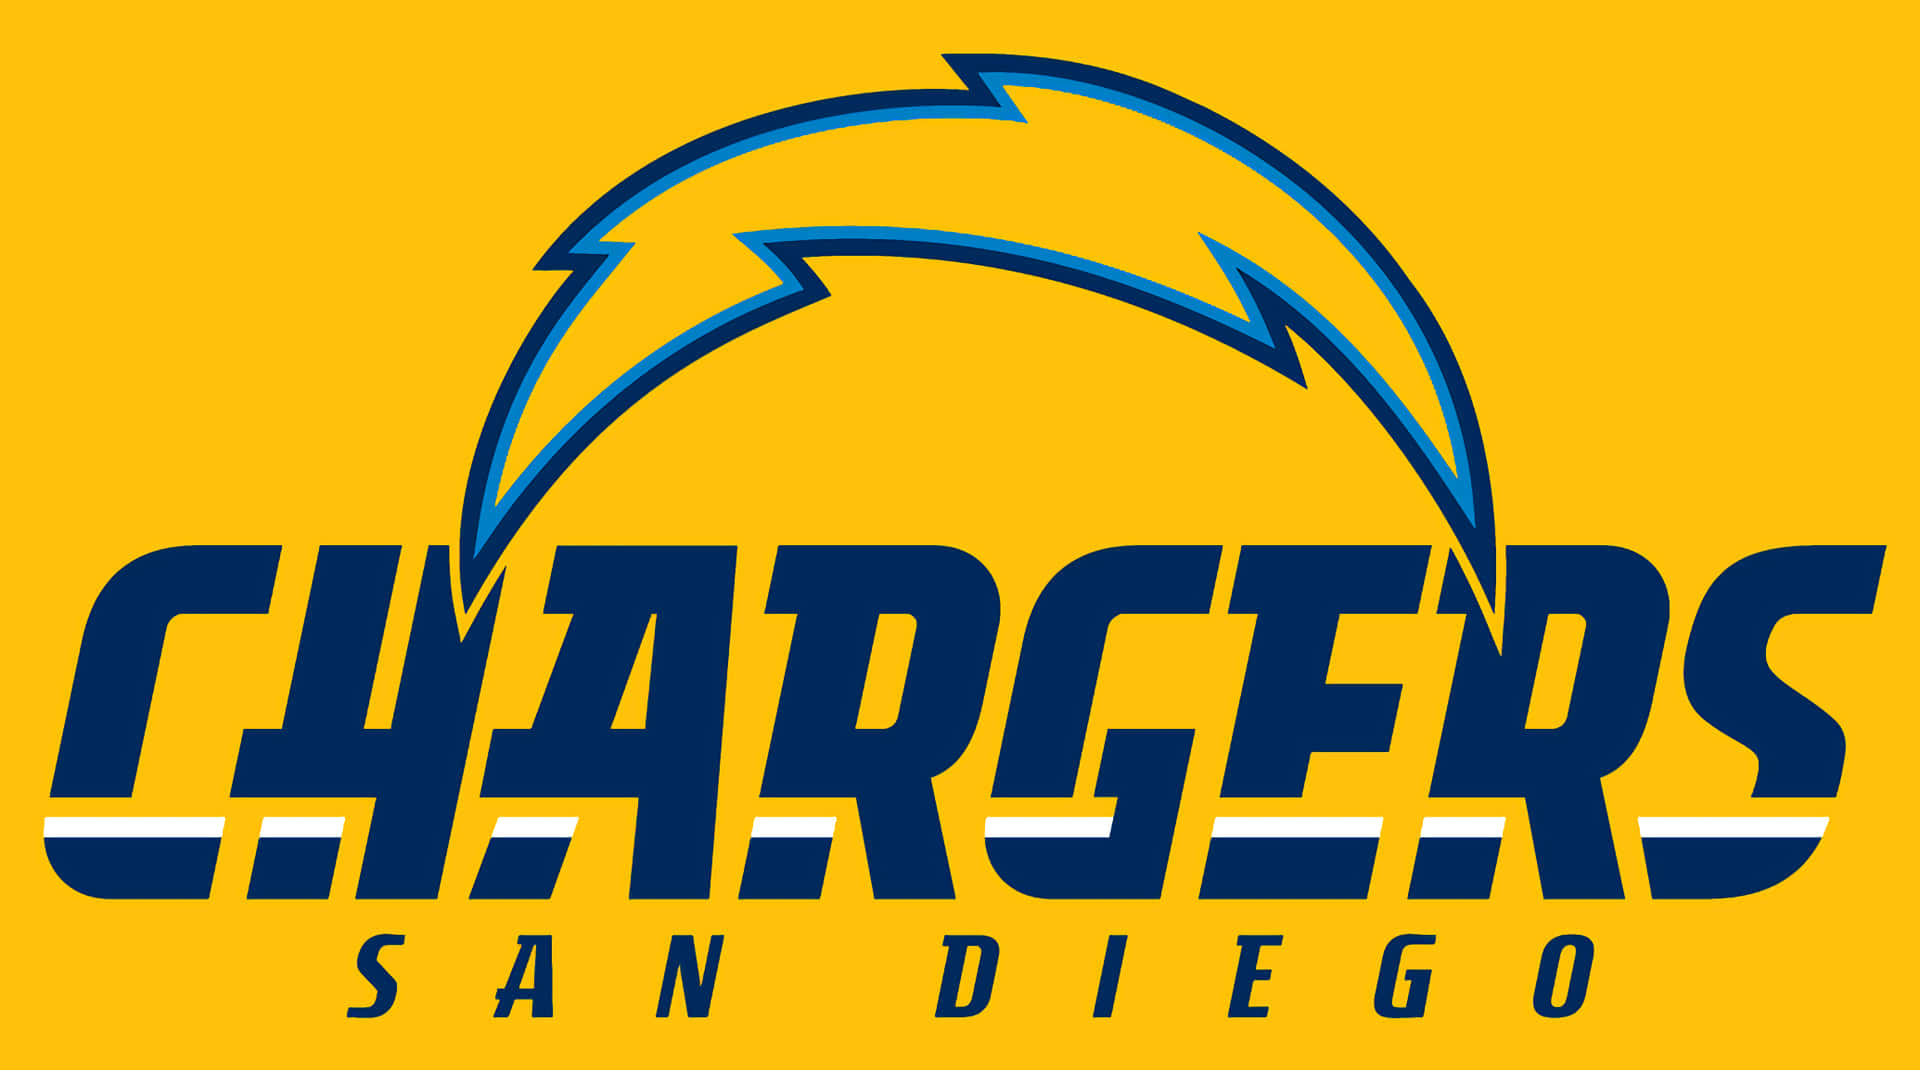 San Diego Chargers logo displayed proudly Wallpaper